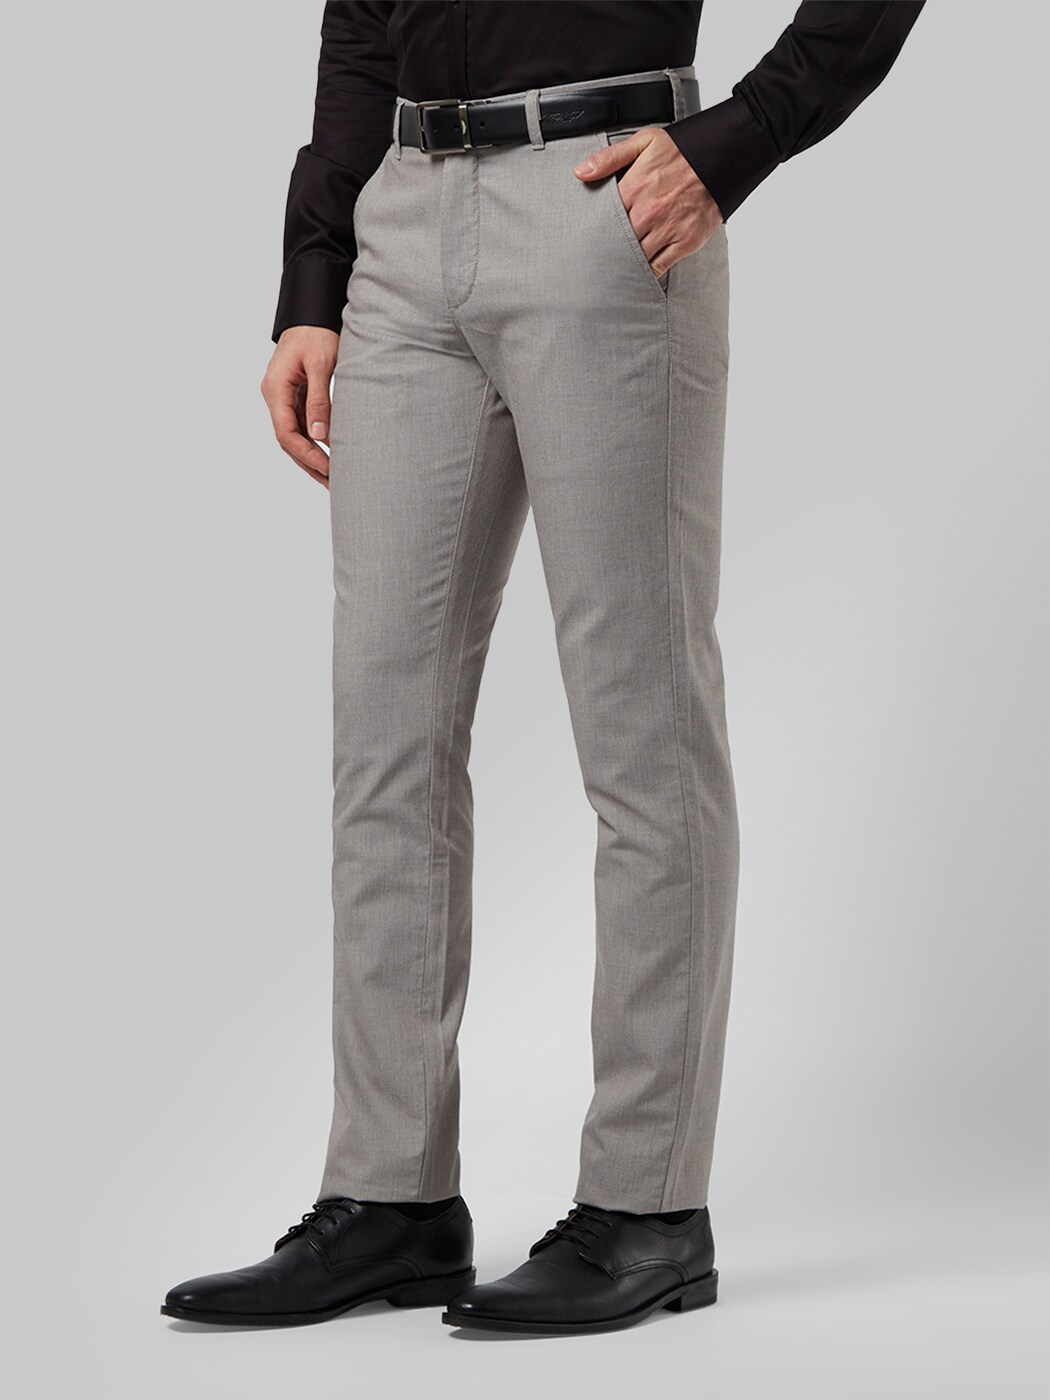 Buy latest Mens Trousers from Park Avenue online in India  Top Collection  at LooksGudin  Looksgudin